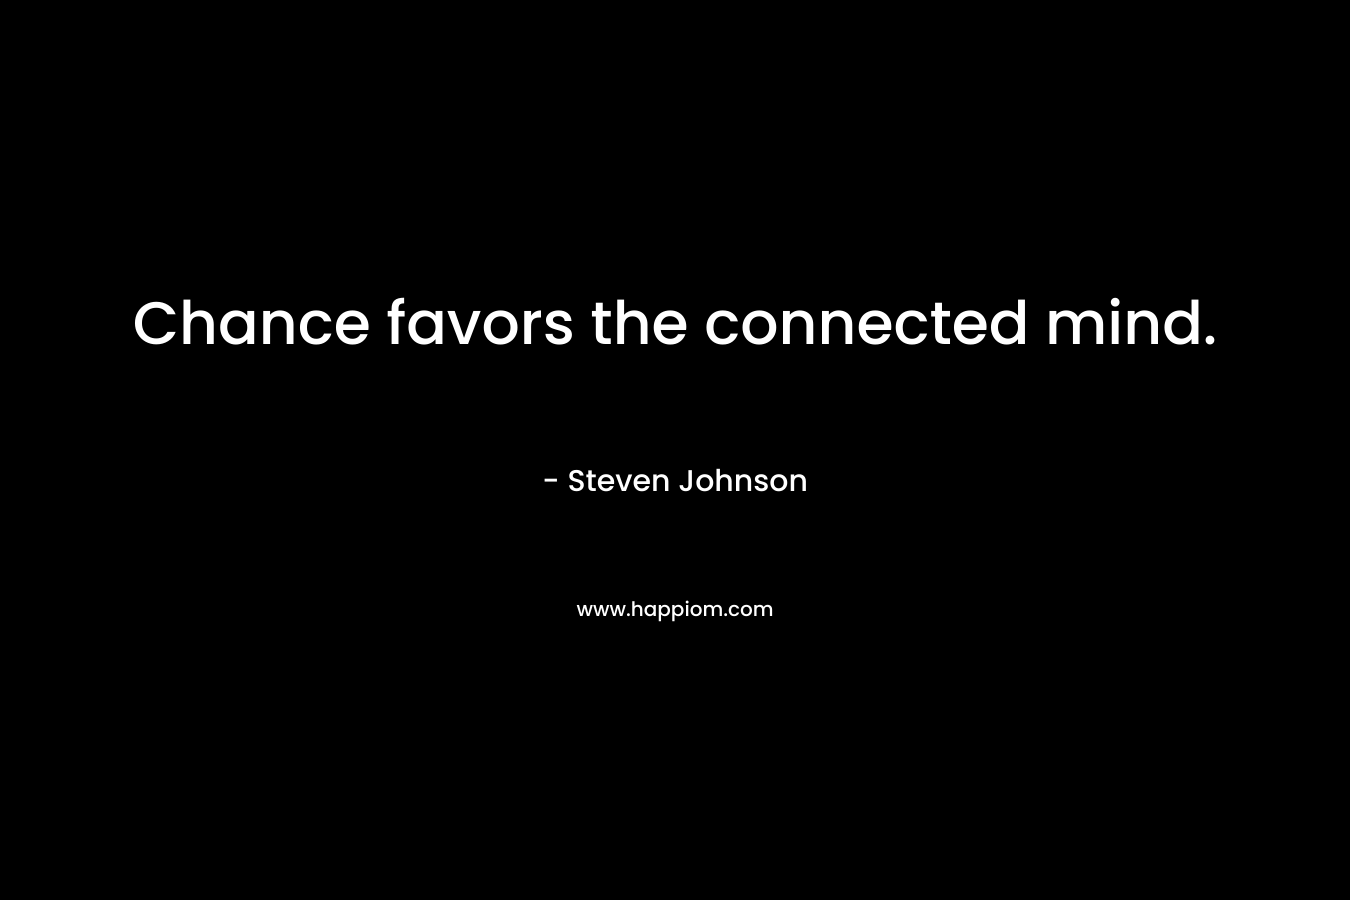 Chance favors the connected mind.